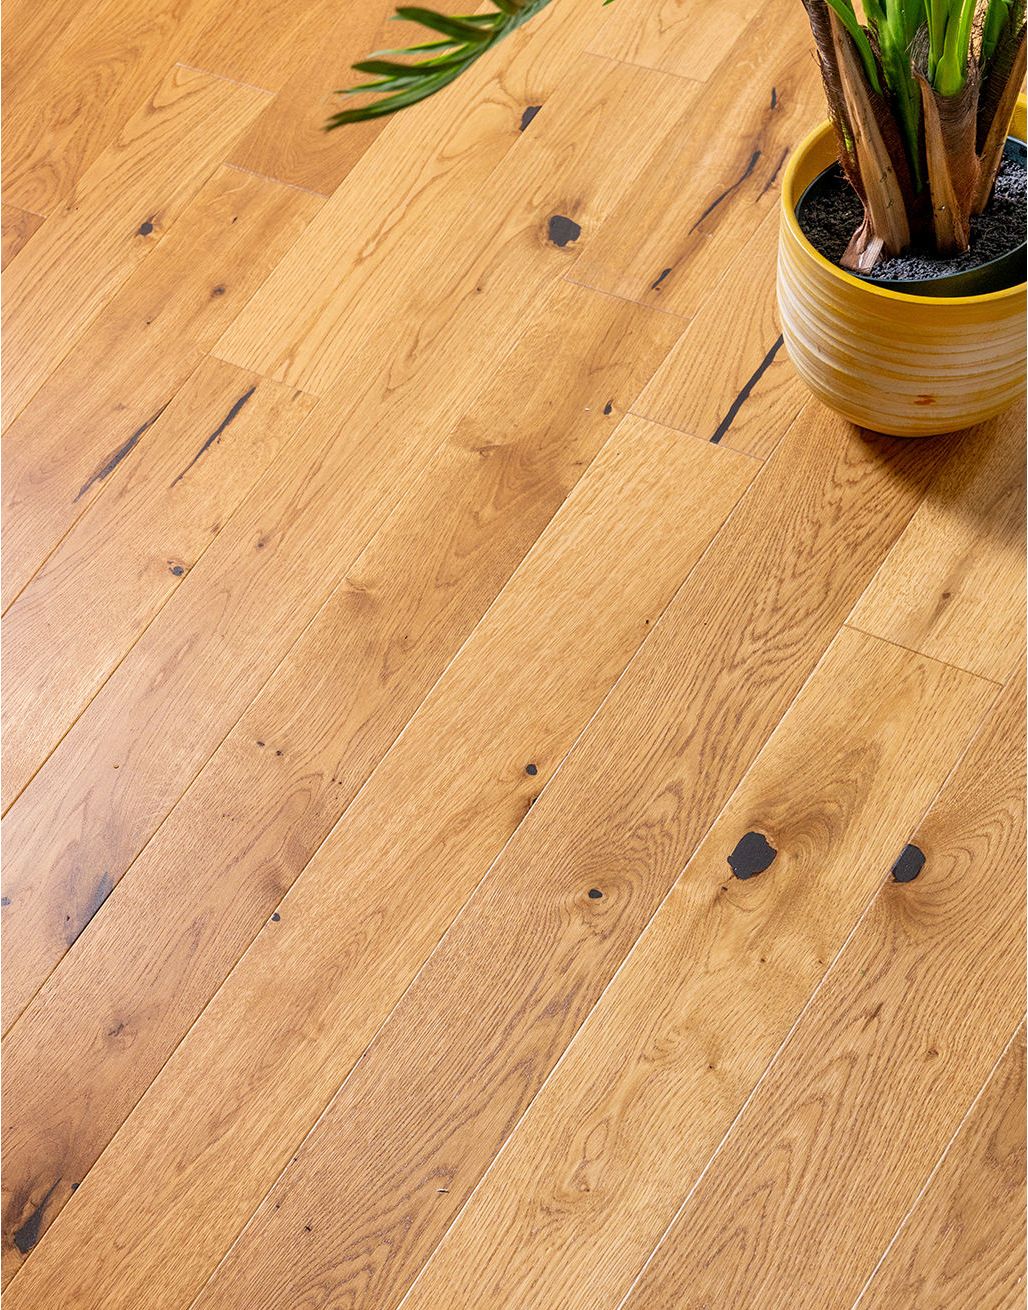 Carpenters Choice 110mm Natural Oak Brushed & Lacquered Engineered Wood Flooring 2